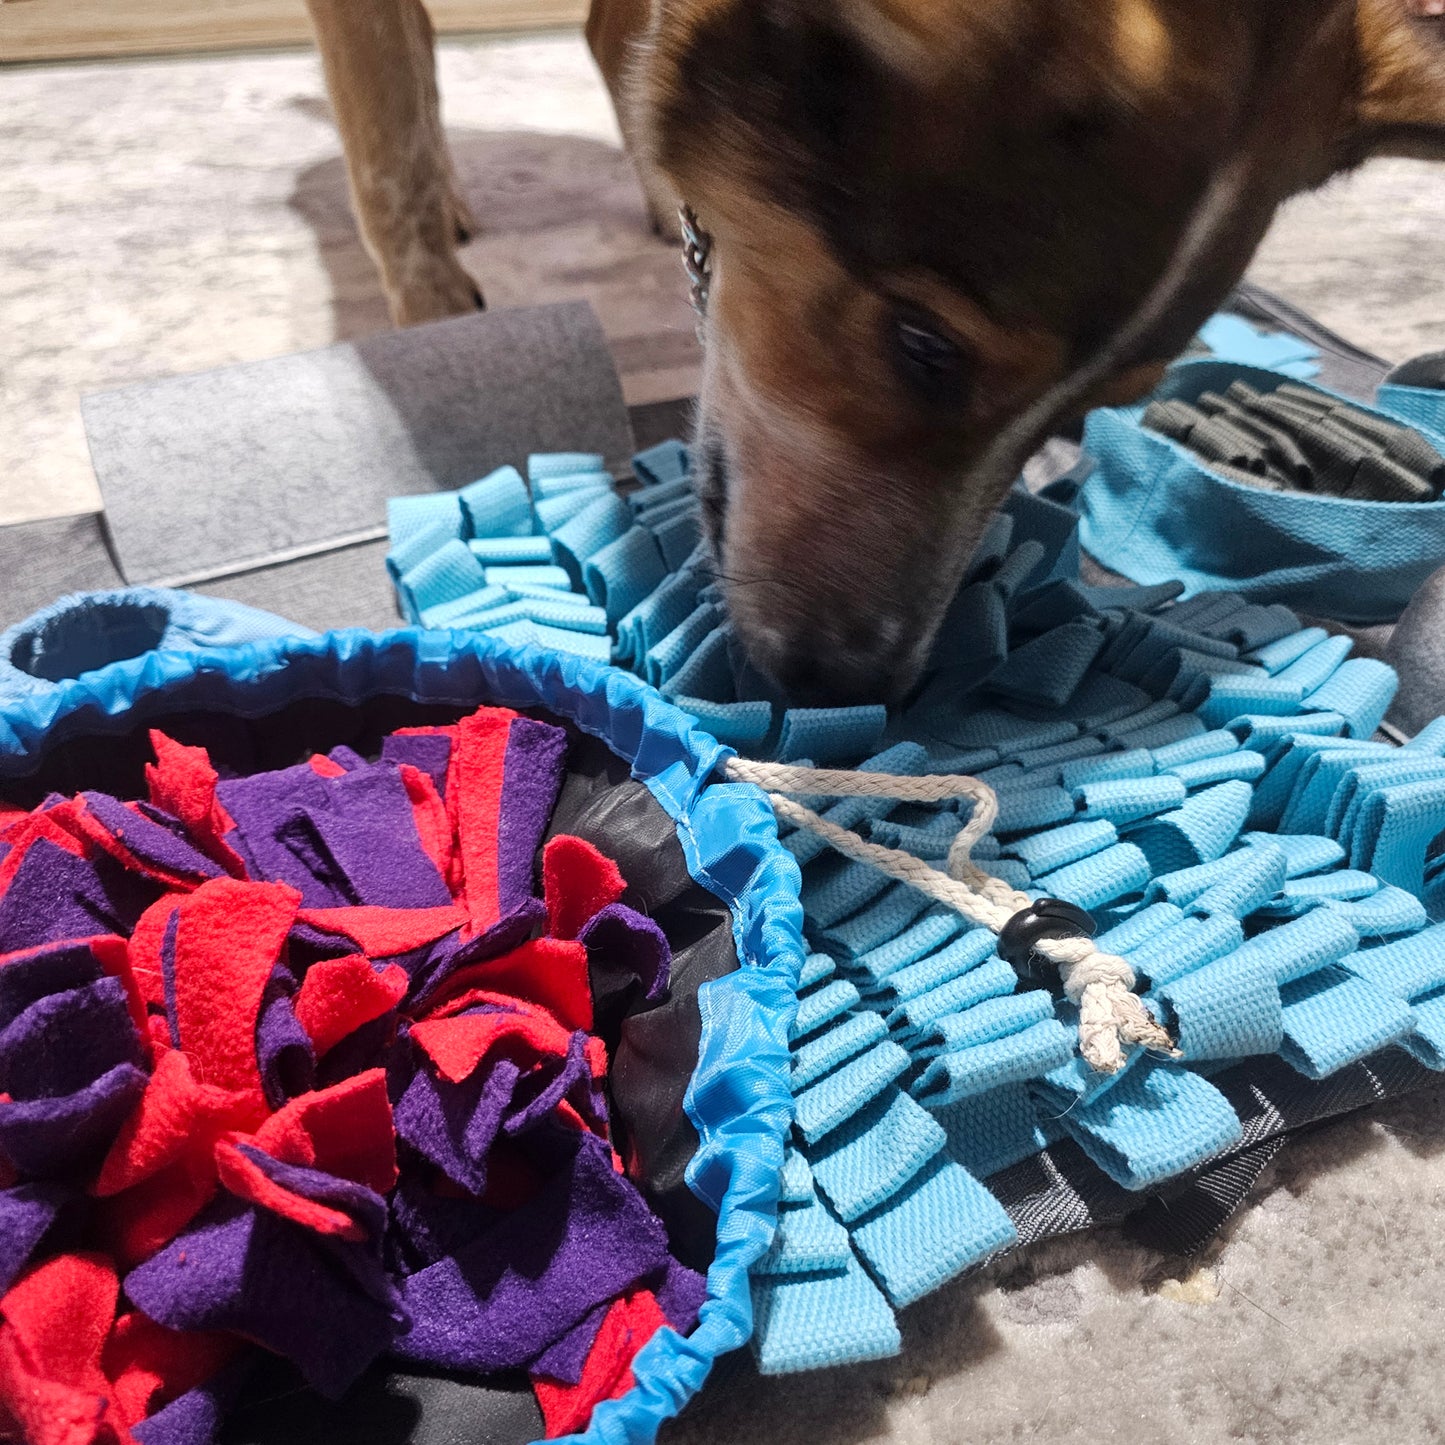 The Riddler - Snuffle Mat - With Drawstring Bowl